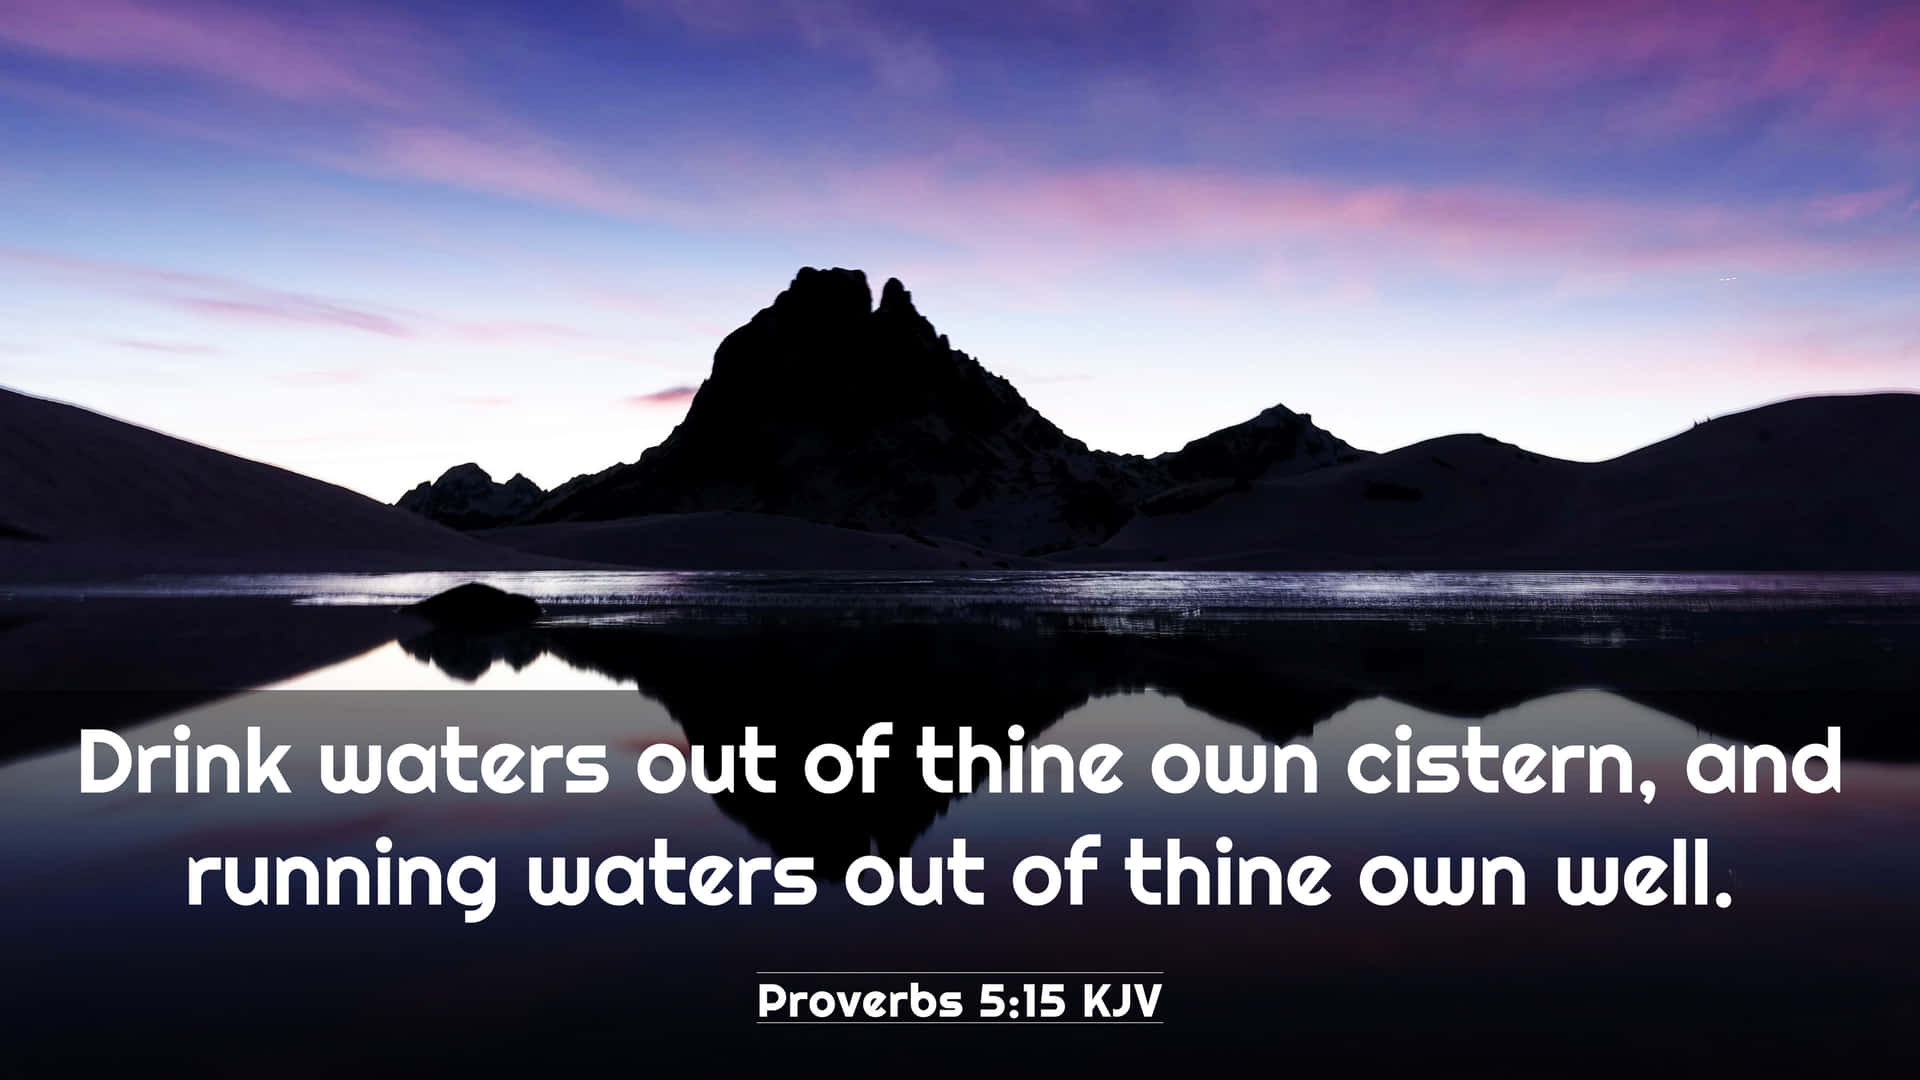 A Mountain With The Words Drink Out Of The Waters Of Our Own Cries And Running Water Out Of Our Own Wells Wallpaper